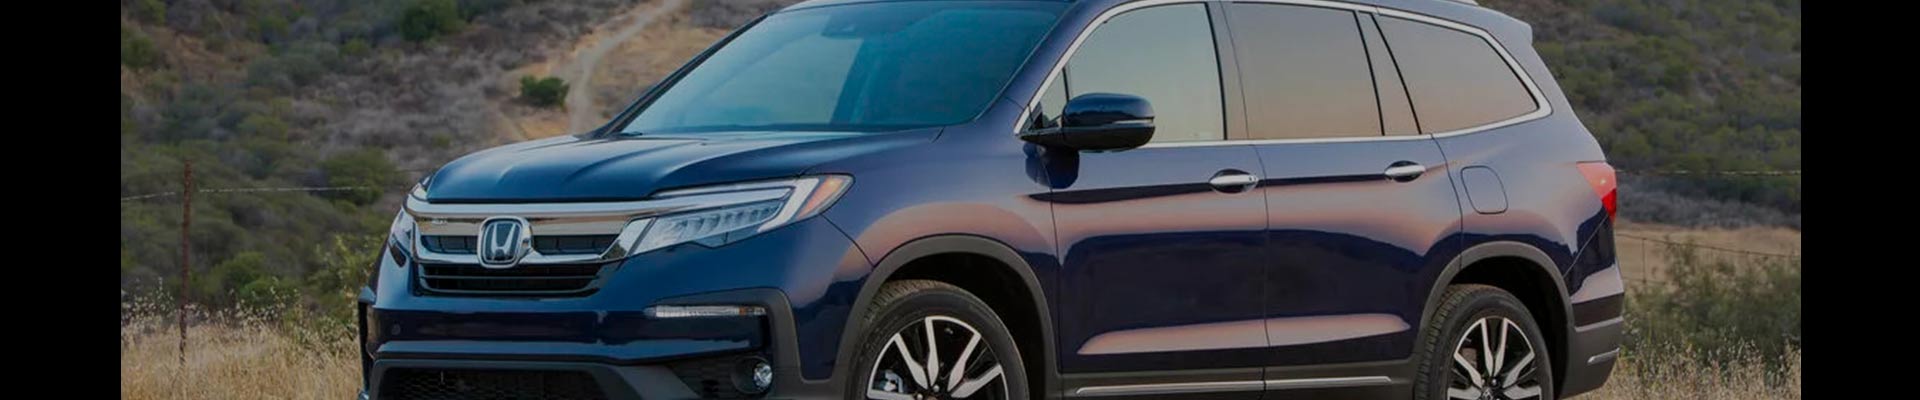 Shop Replacement and OEM 2018 Honda Pilot Parts with Discounted Price on the Net